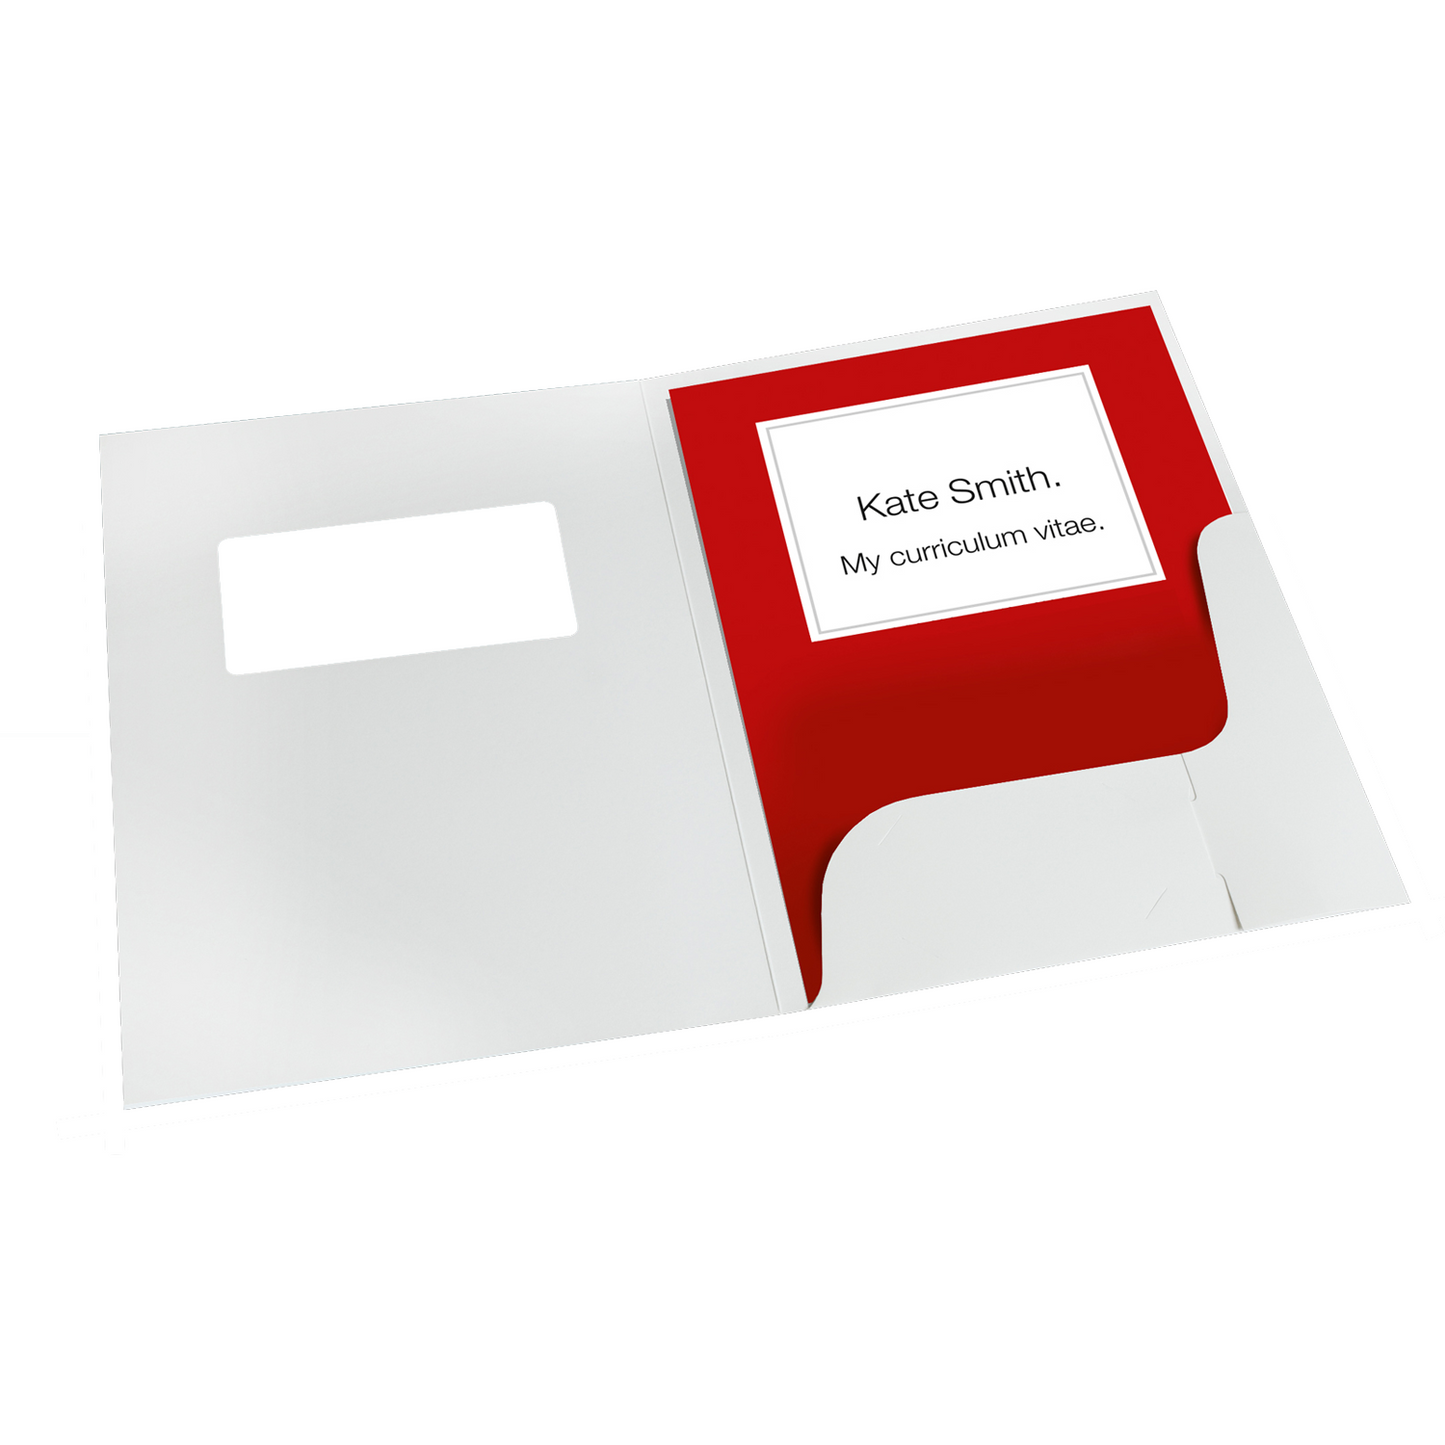 An open gloss white 250gsm card presentation folder containing a red interior document with 'Kate Smith. My curriculum vitae.' The presentation folder also features a pocket to keep the document in place, and 2 slots to hold a single business card. There is a display window cut out from the front of the folder, to display the content inside.